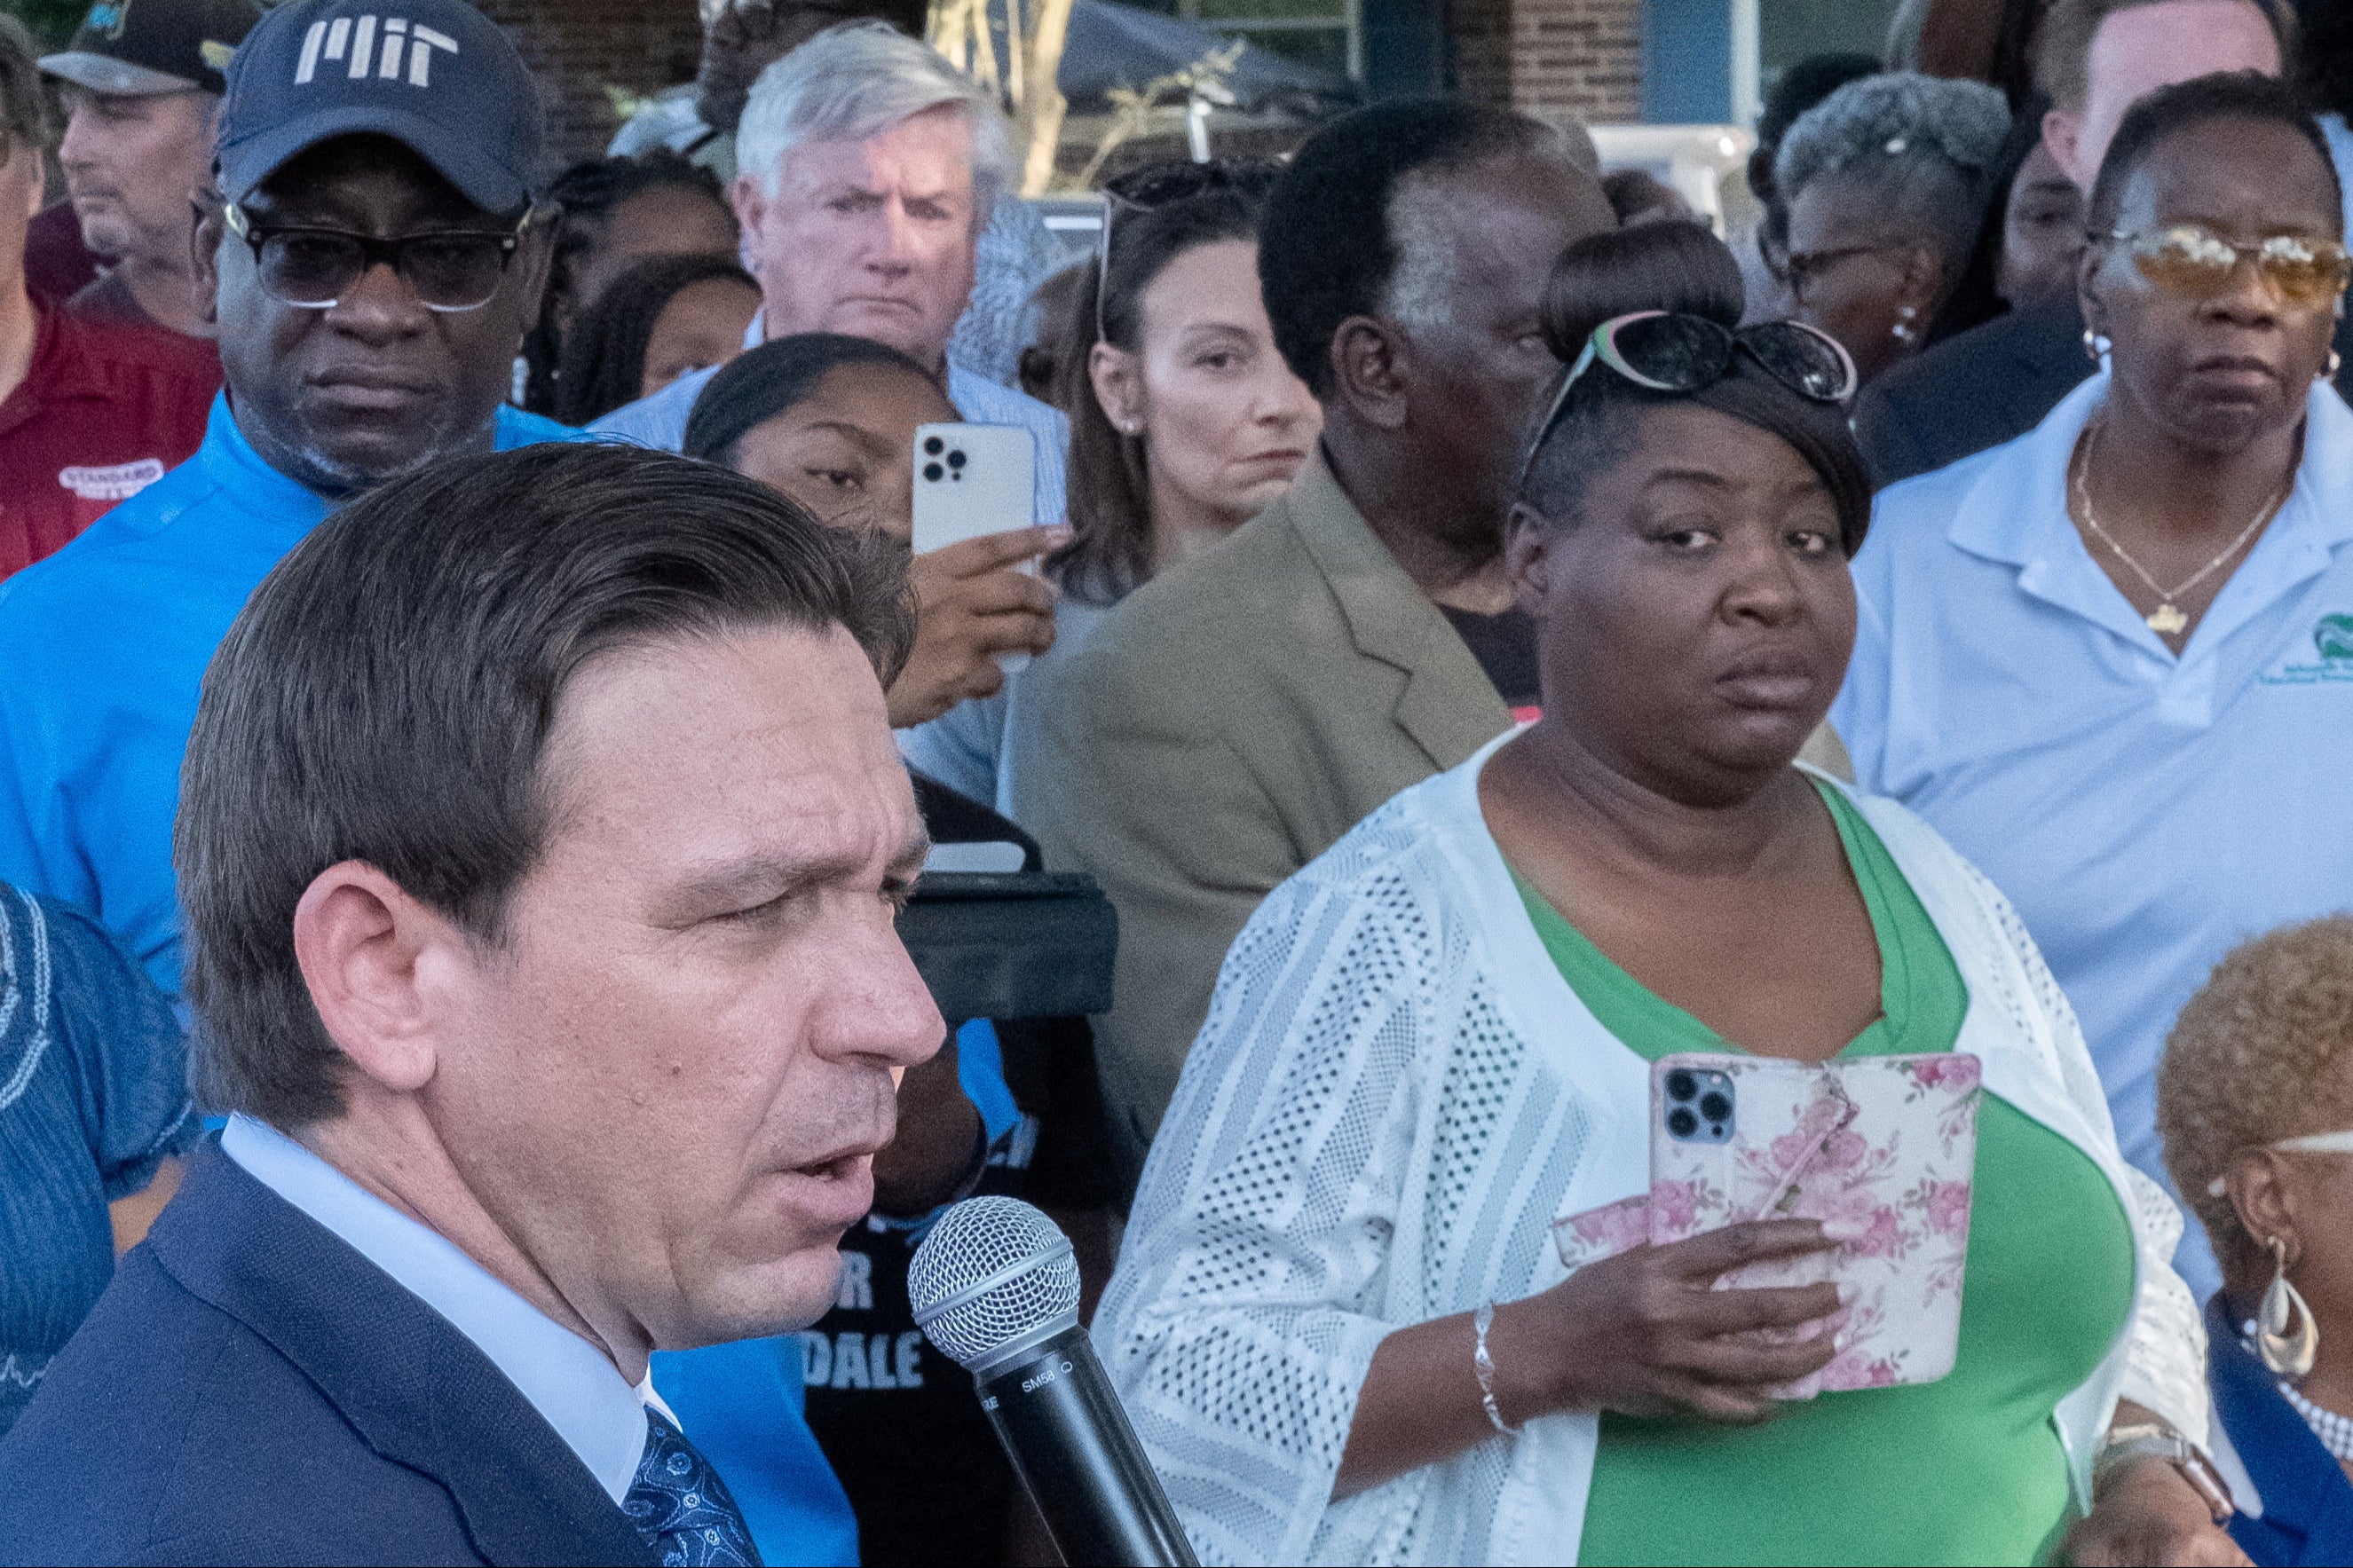 Ron DeSantis speaks at a prayer vigil after a white man armed with a rifle and a handgun killed three Black people at a Dollar General store in Florida